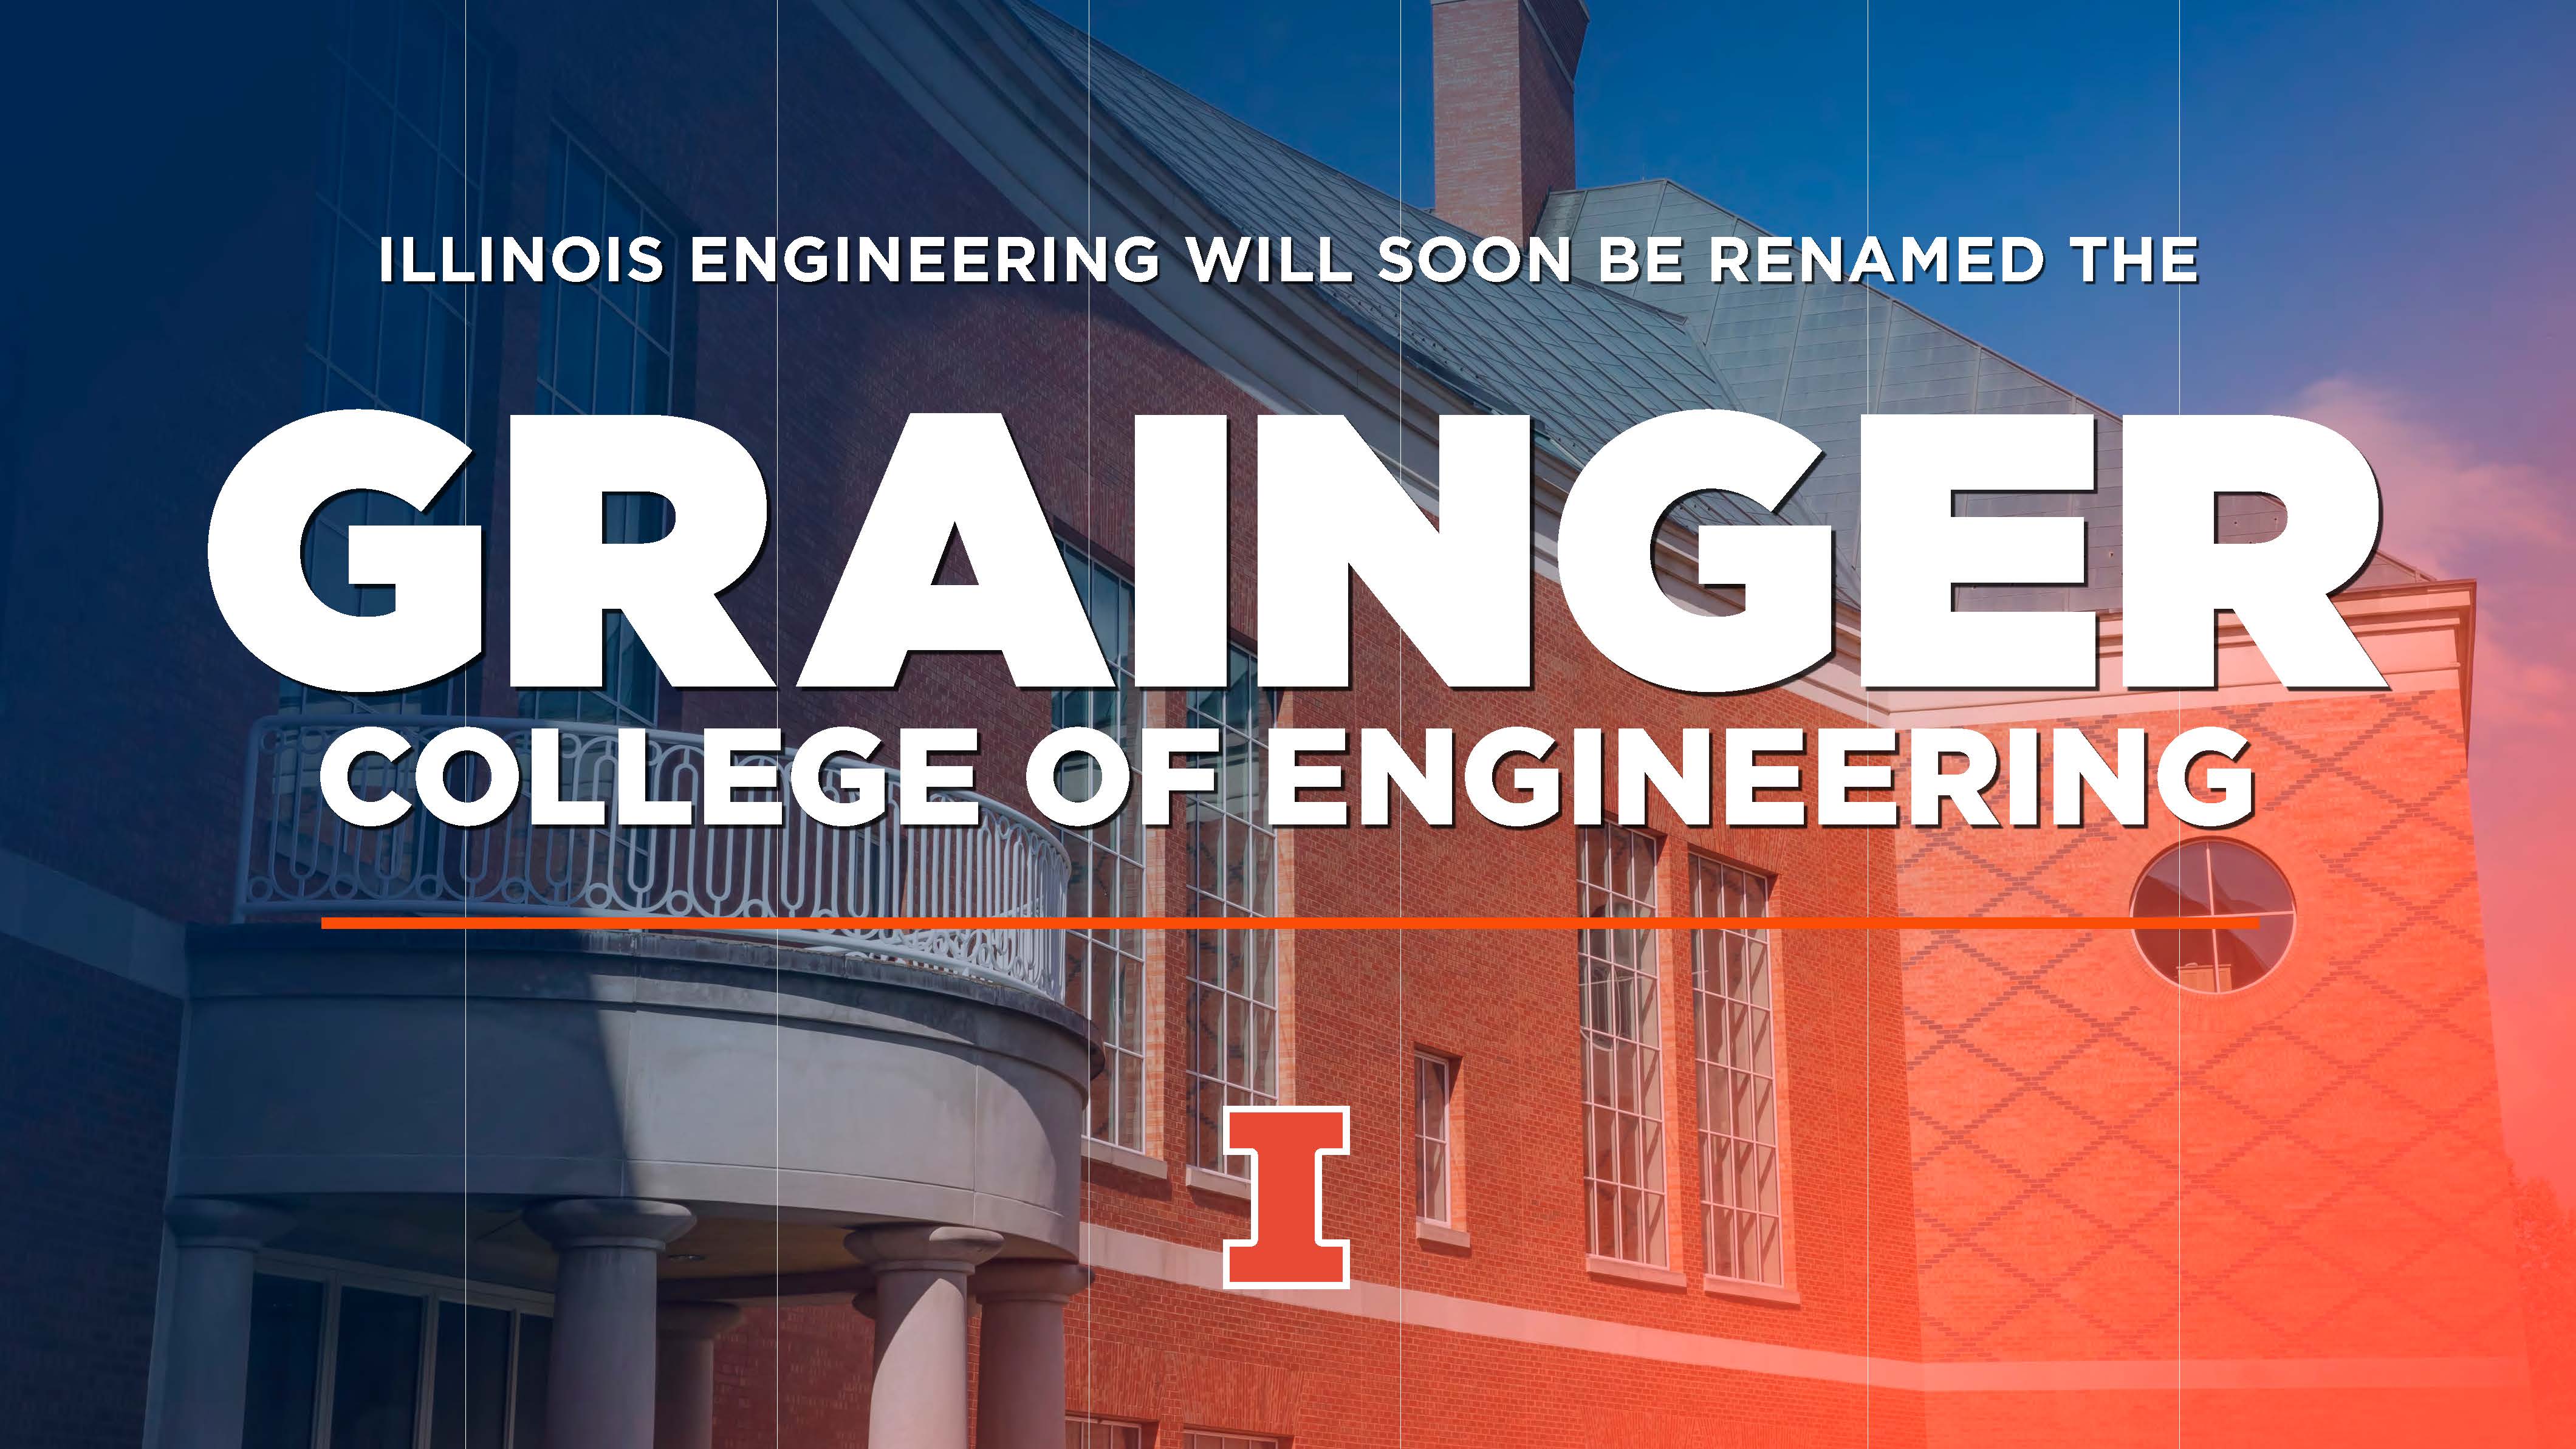 Illinois Engineering to be renamed The Grainger College of Engineering